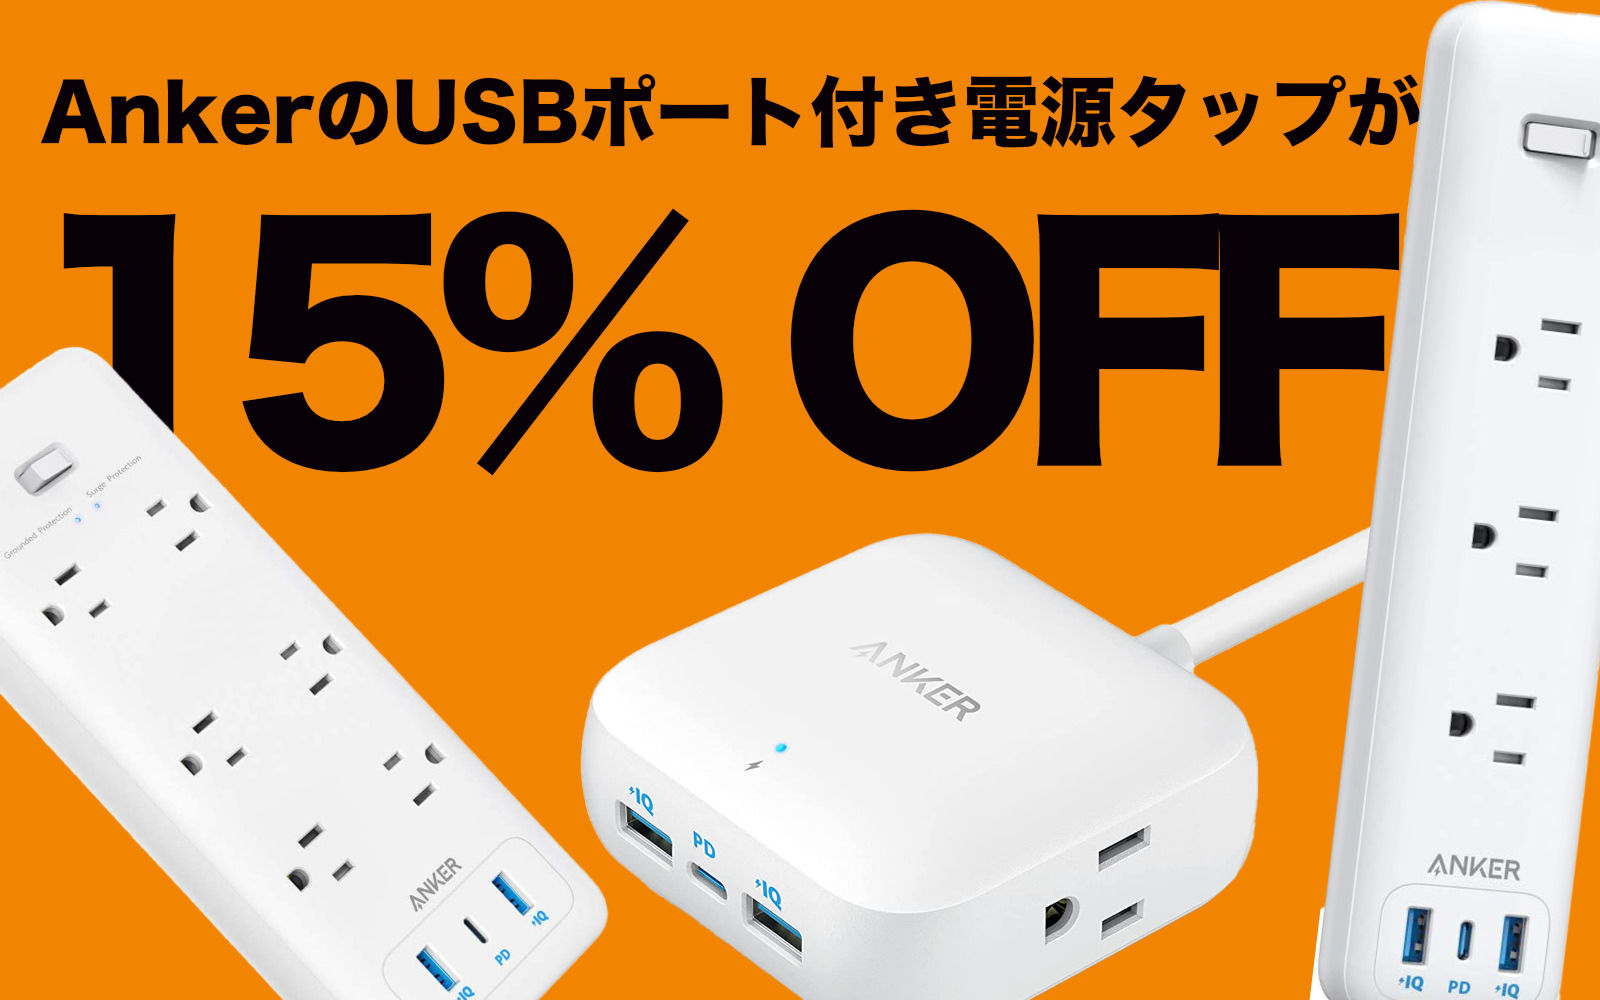 Anker USB charger tap sale